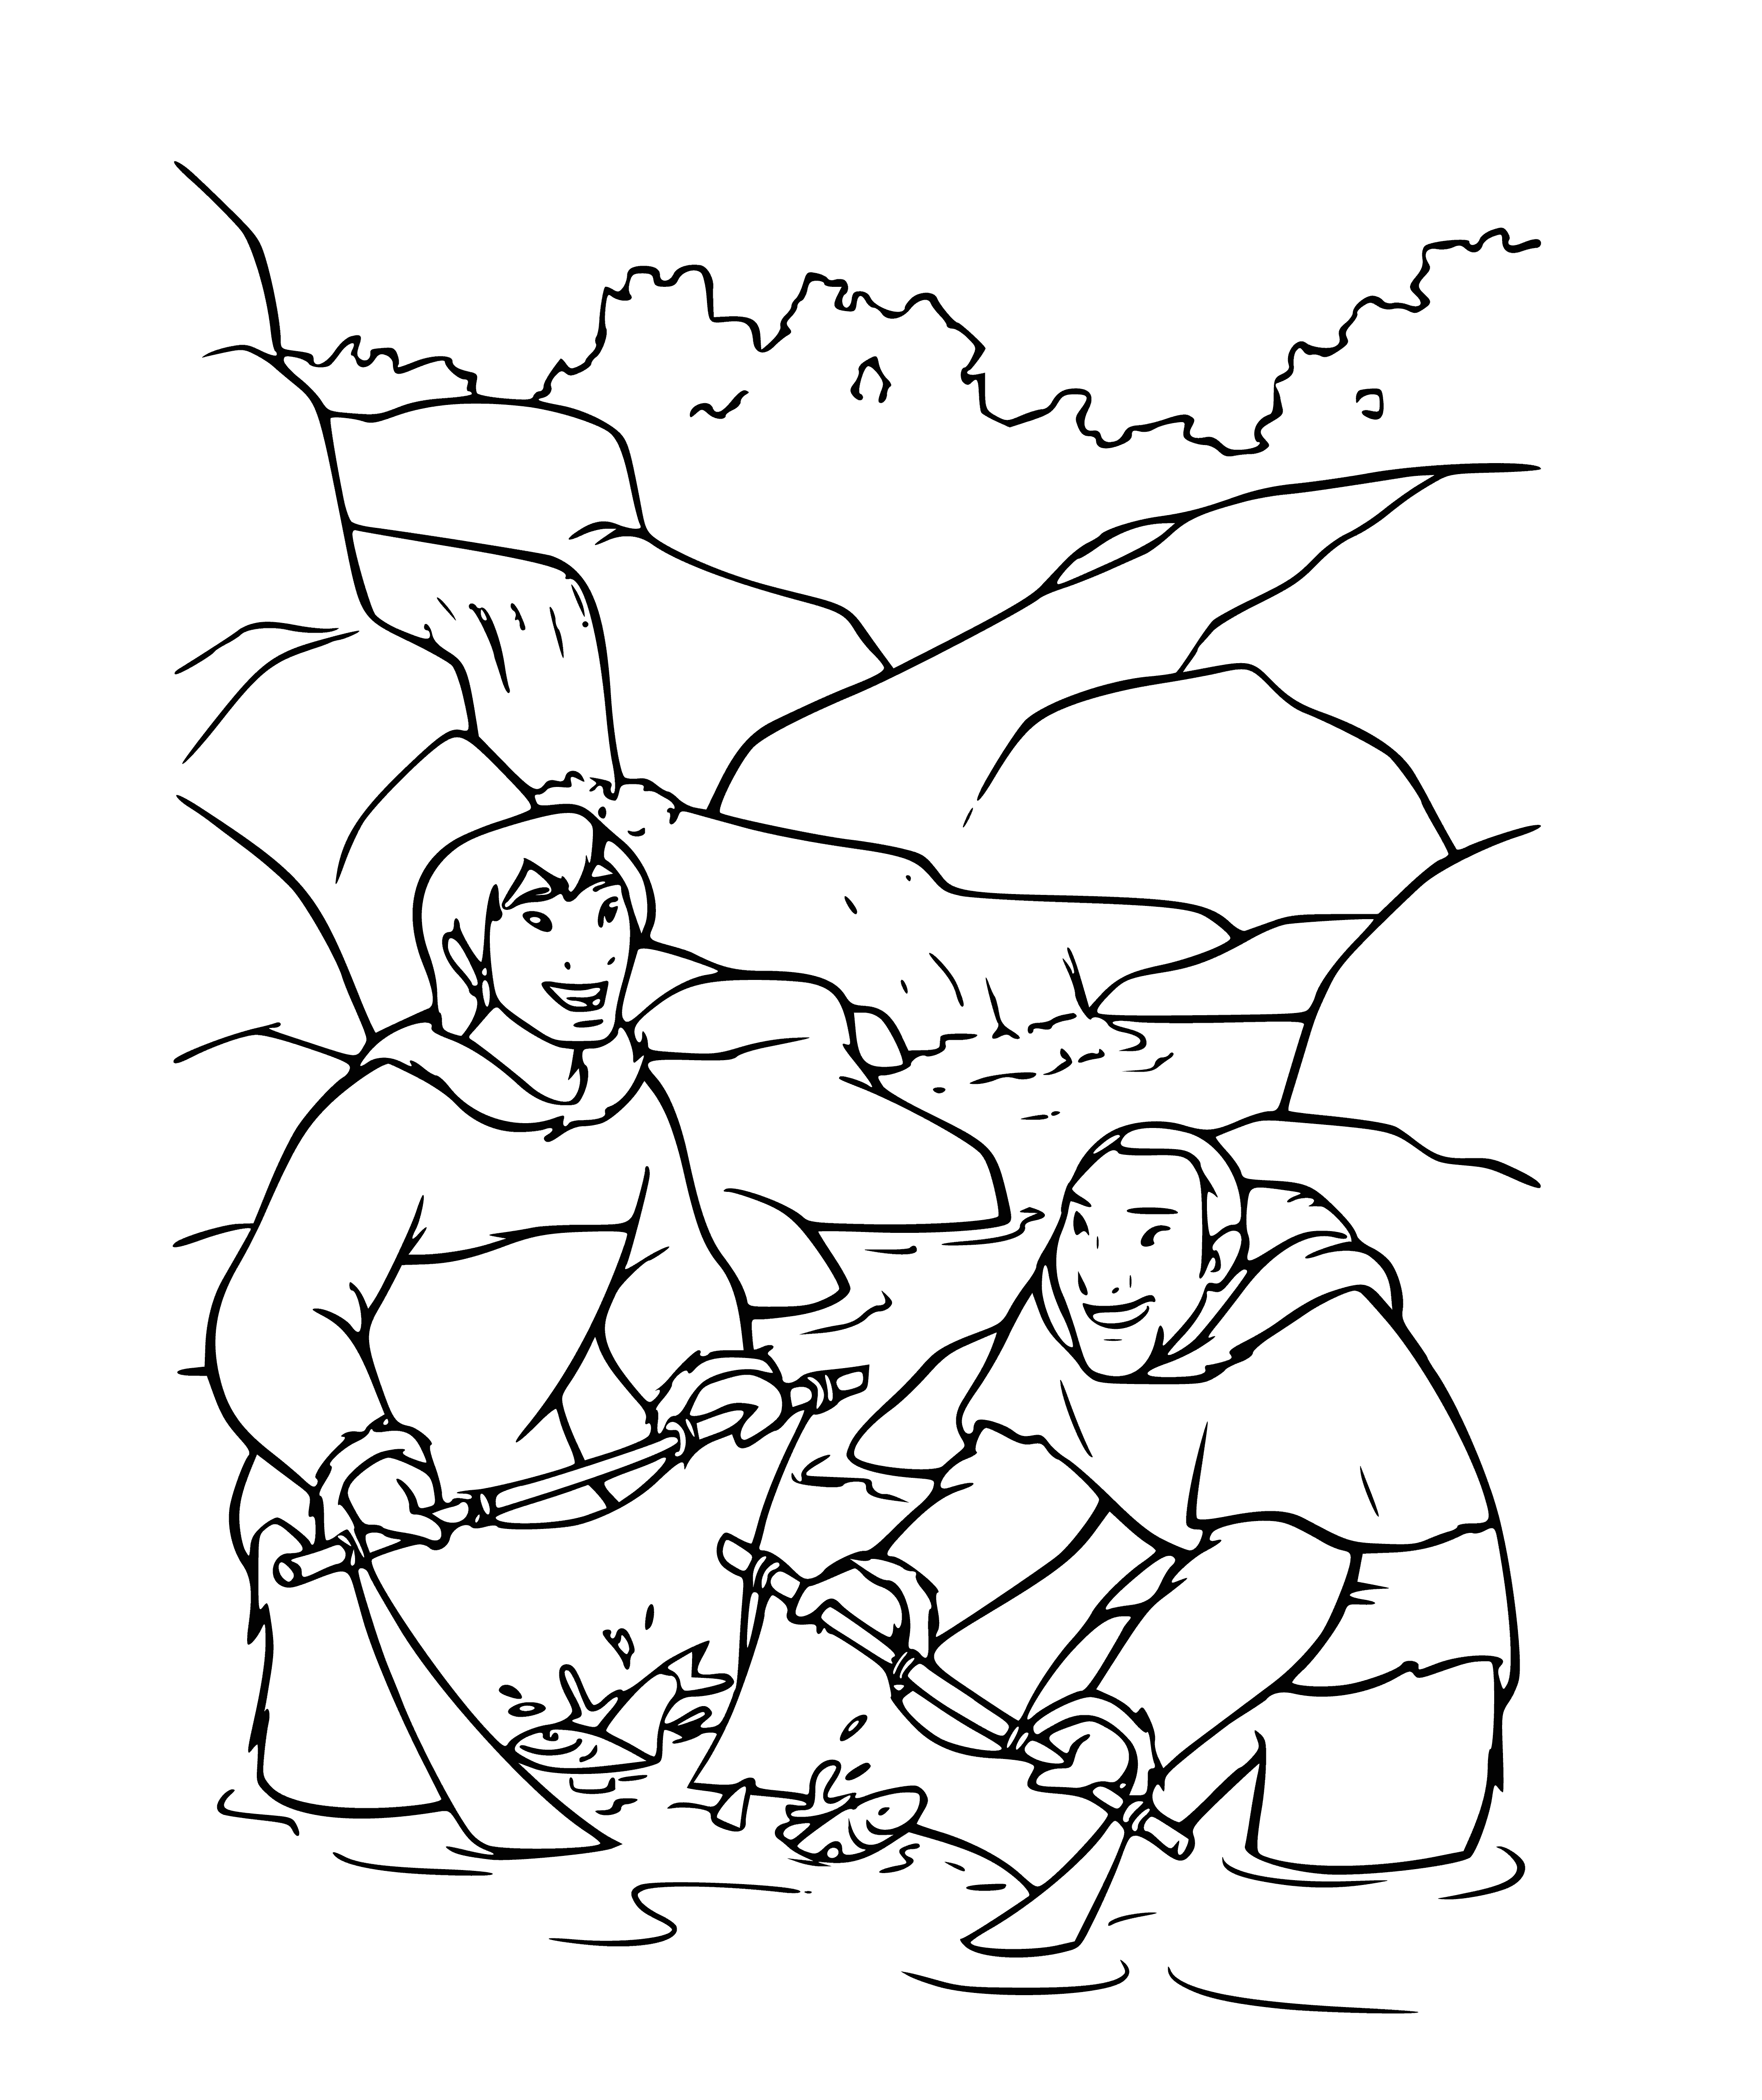 coloring page: Kenai and brother wearing white fur pelts; Kenai has spear and brother is pointing at something in the distance.